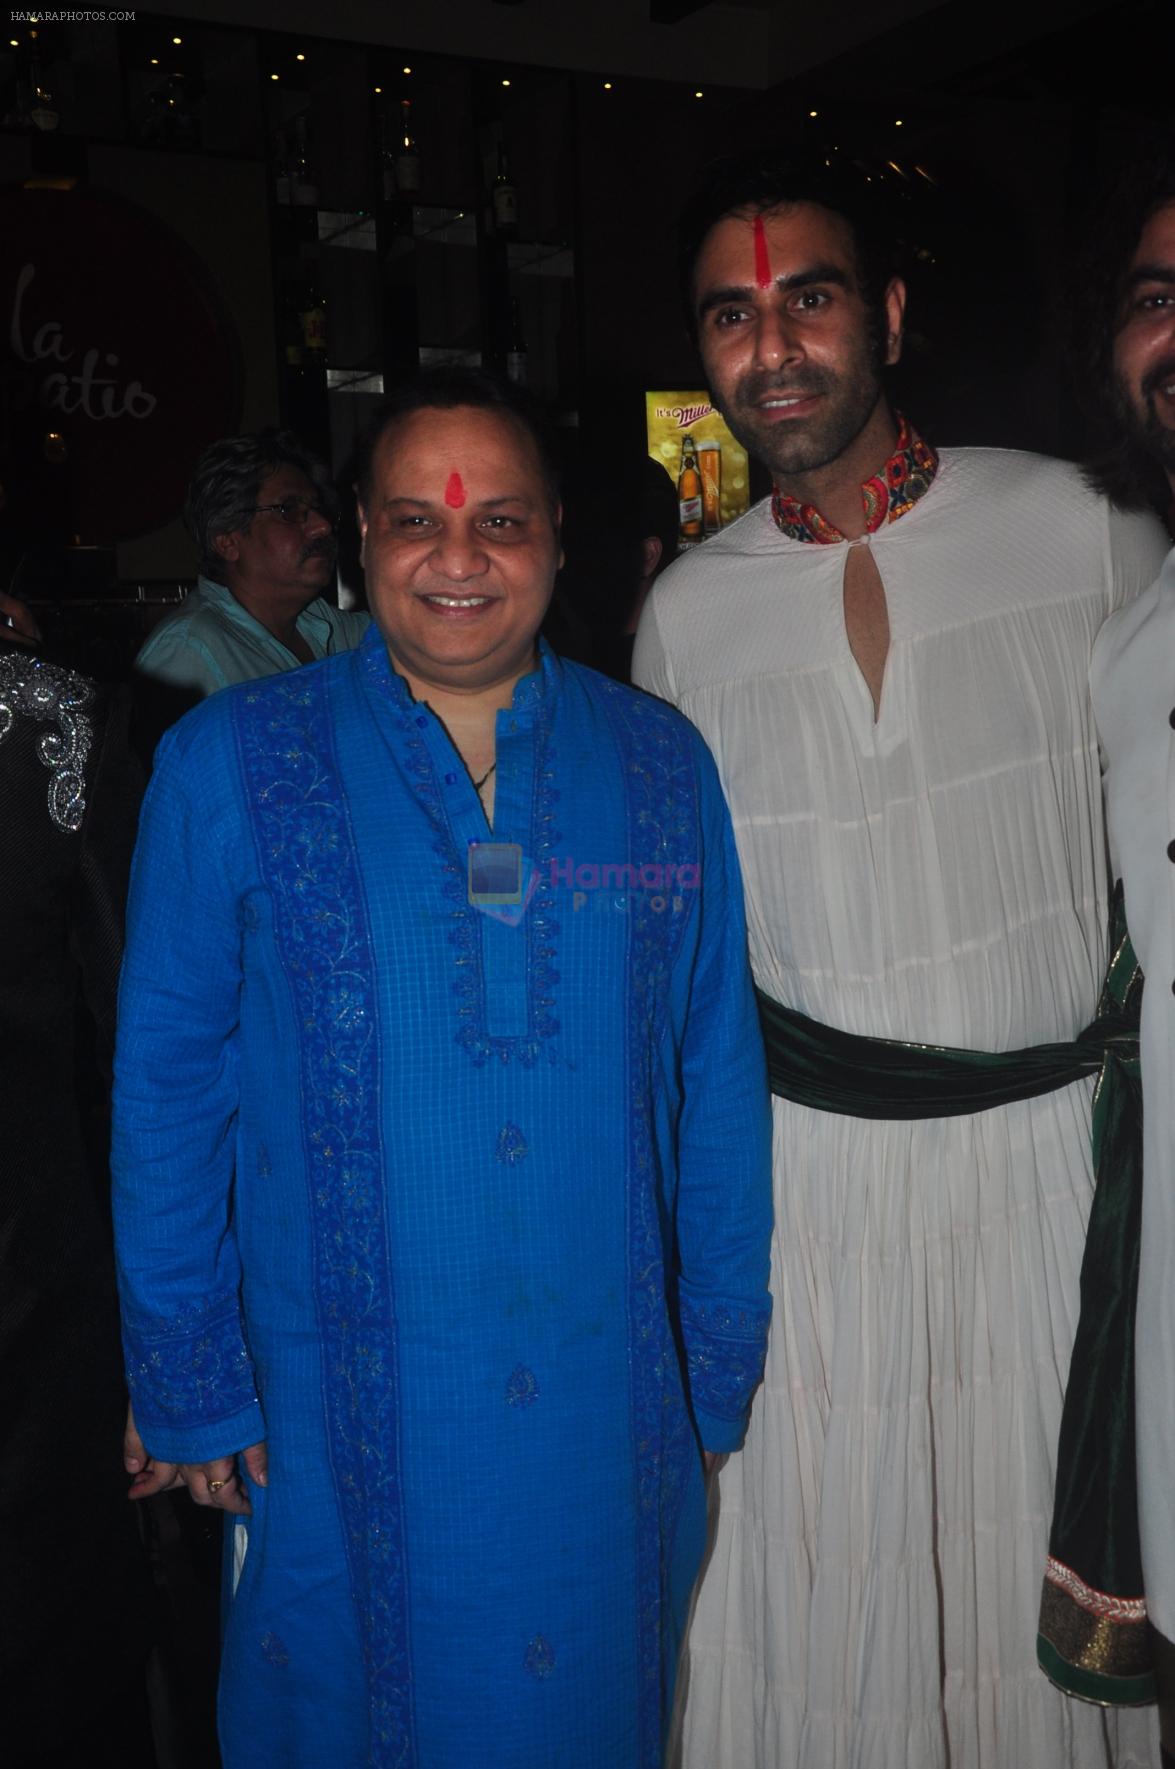 Sanjay Sharma and Sandeep Soparrkar pose at the Aryan-Ashley sangeet of Dunno Y2 signifying same-sex marriage for the first time in Bollywood